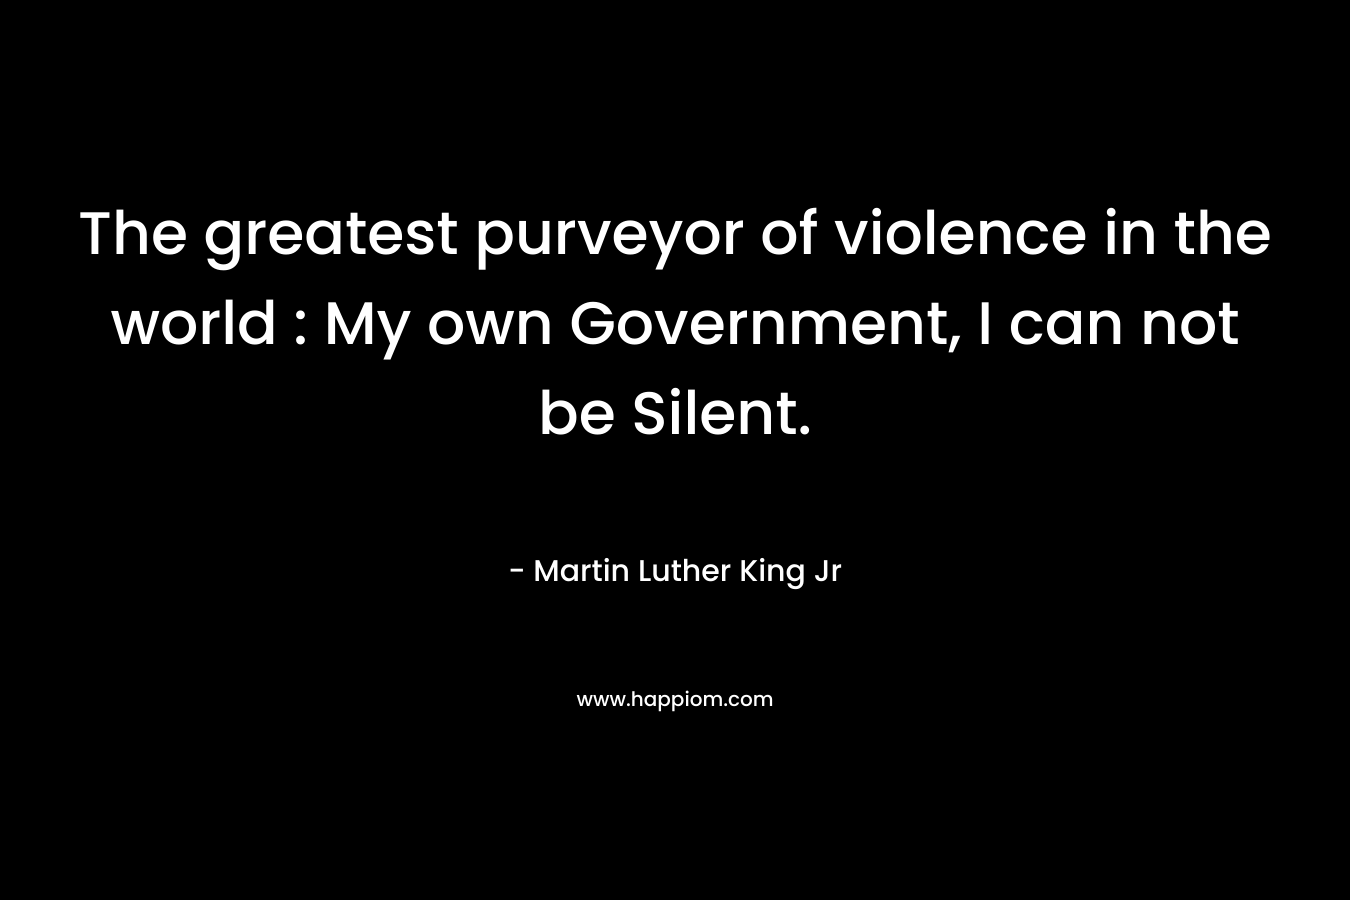 The greatest purveyor of violence in the world : My own Government, I can not be Silent.